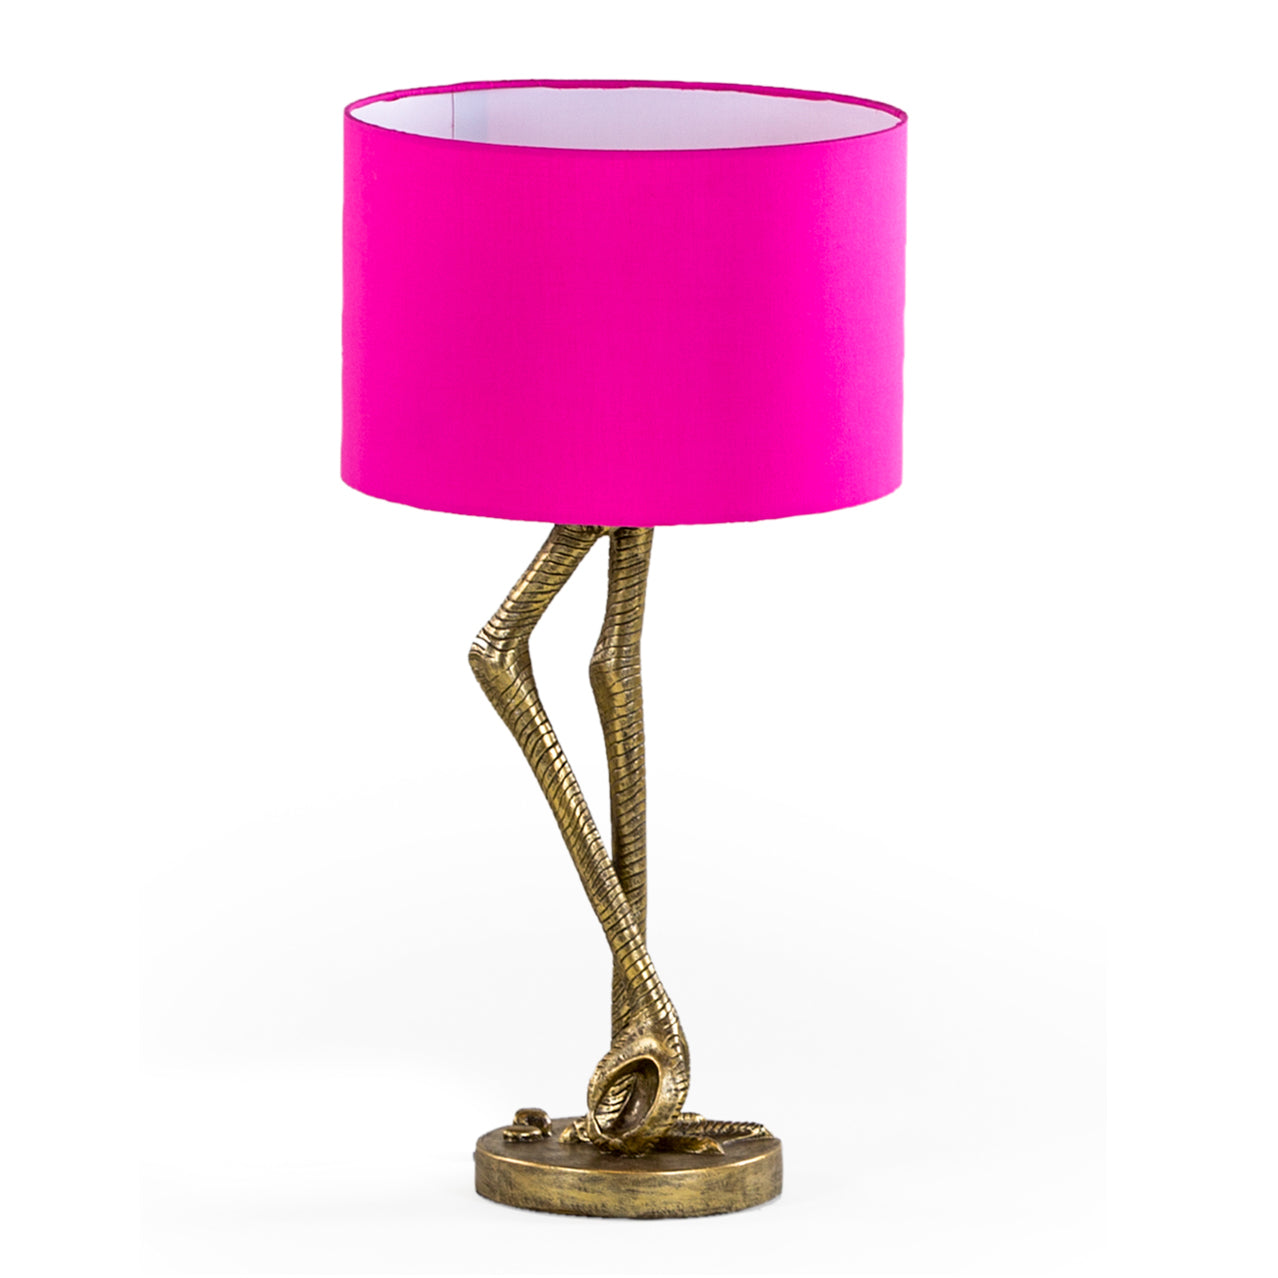 Flamingo Leg Table Lamp with Pink Shade